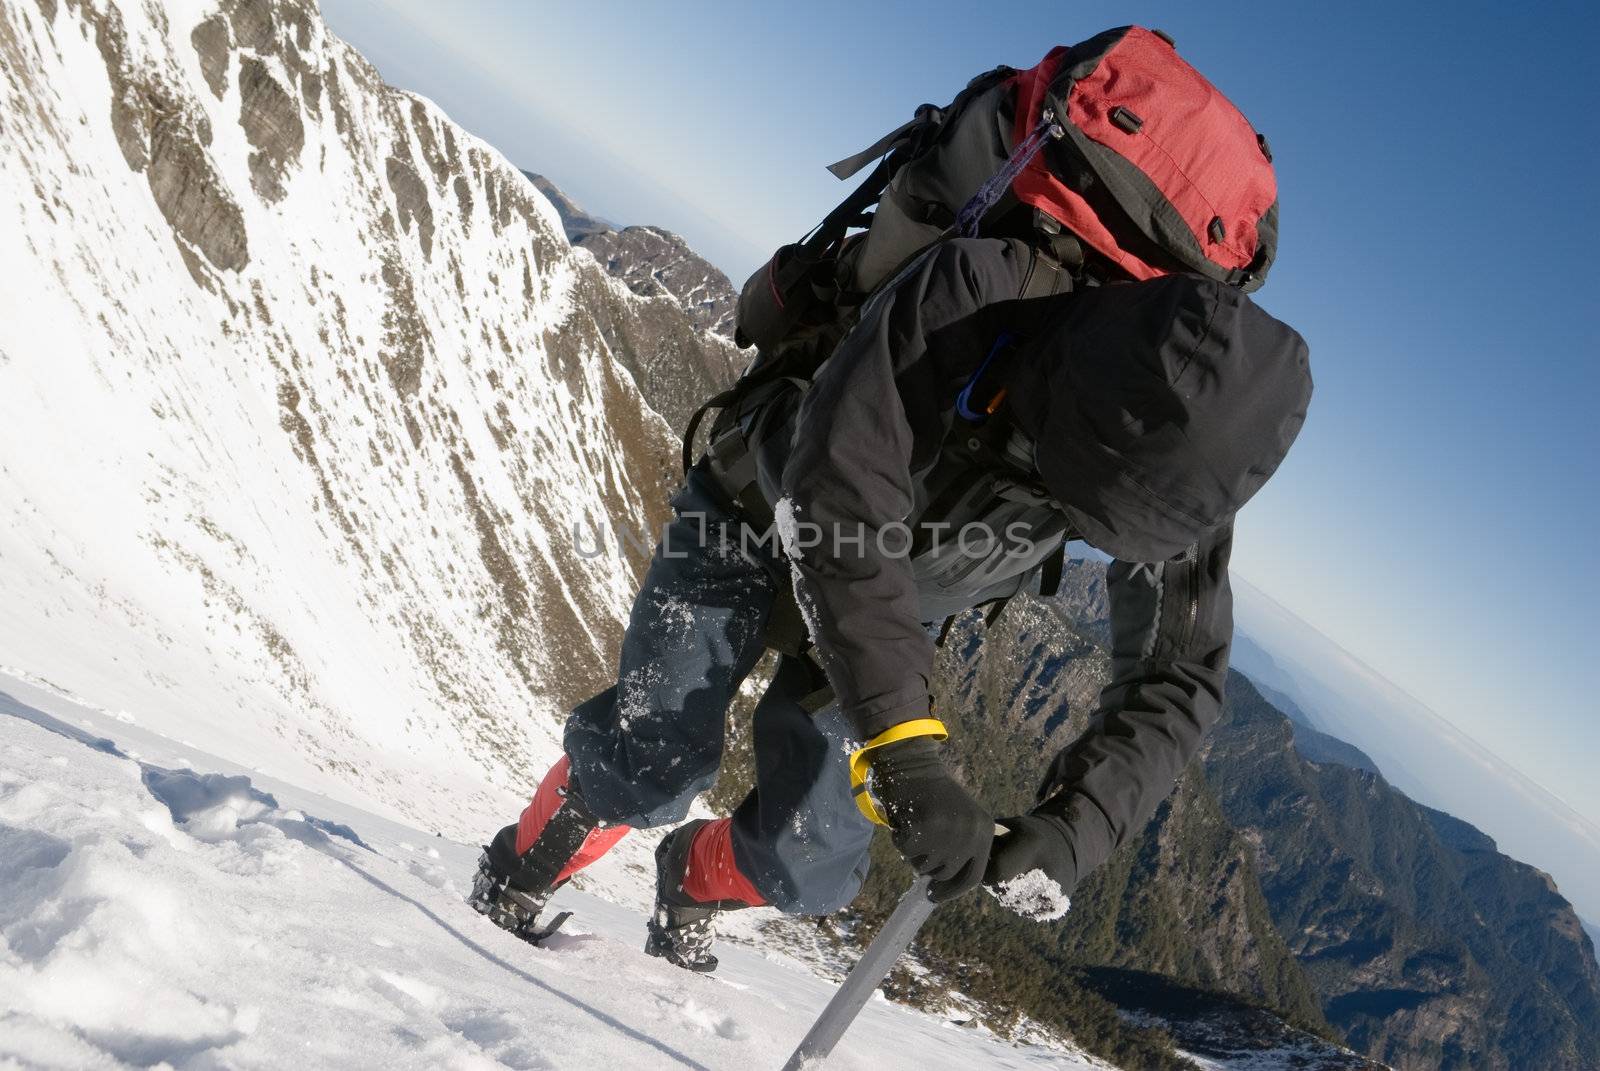 Mountain climber use ice axe to walk on snow ice slop in winter.